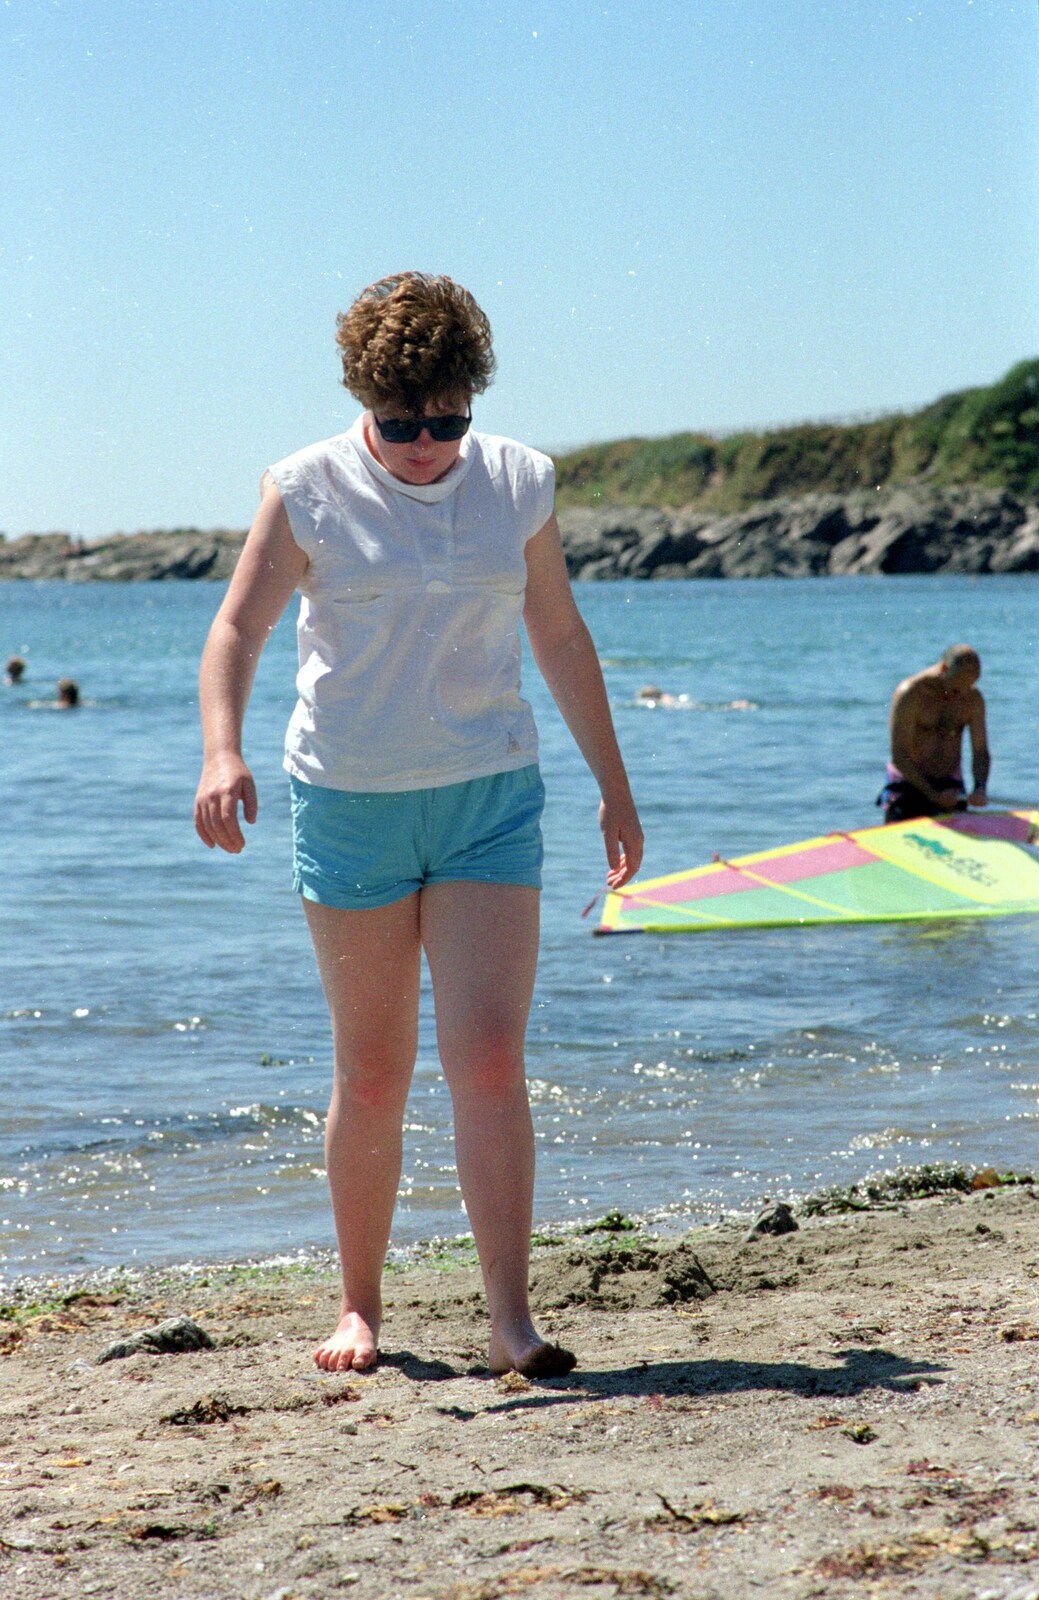 Uni: Country Clubs, On The Beach and Organs, Plymouth - 28th May 1989: Kate walks back from the beach